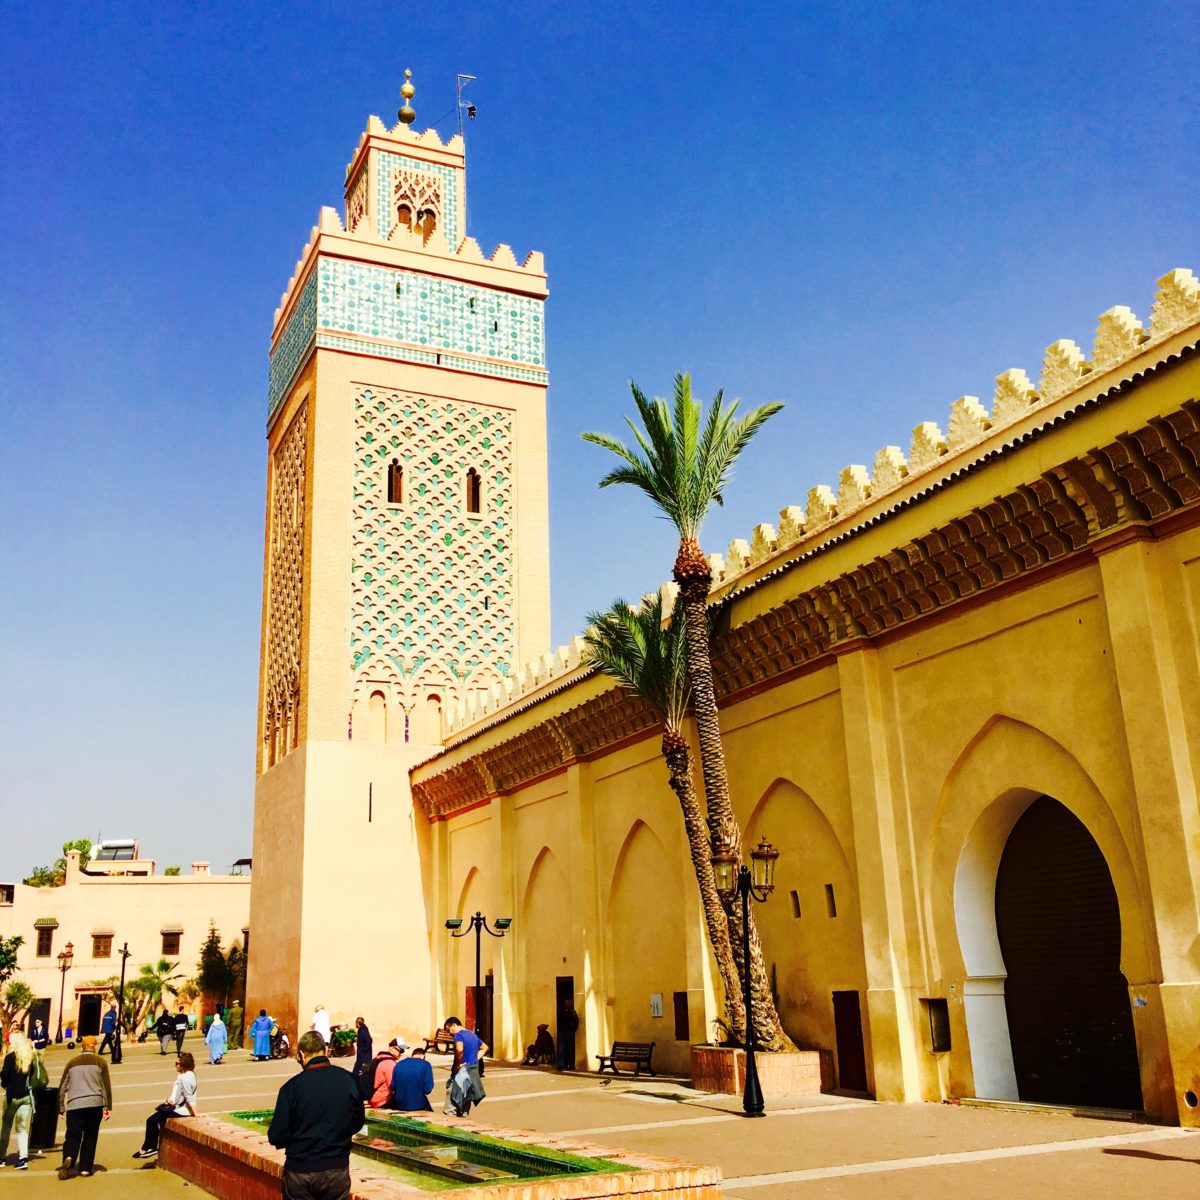 Review FullDay Guided Sightseeing Tour Of Marrakech From Casablanca